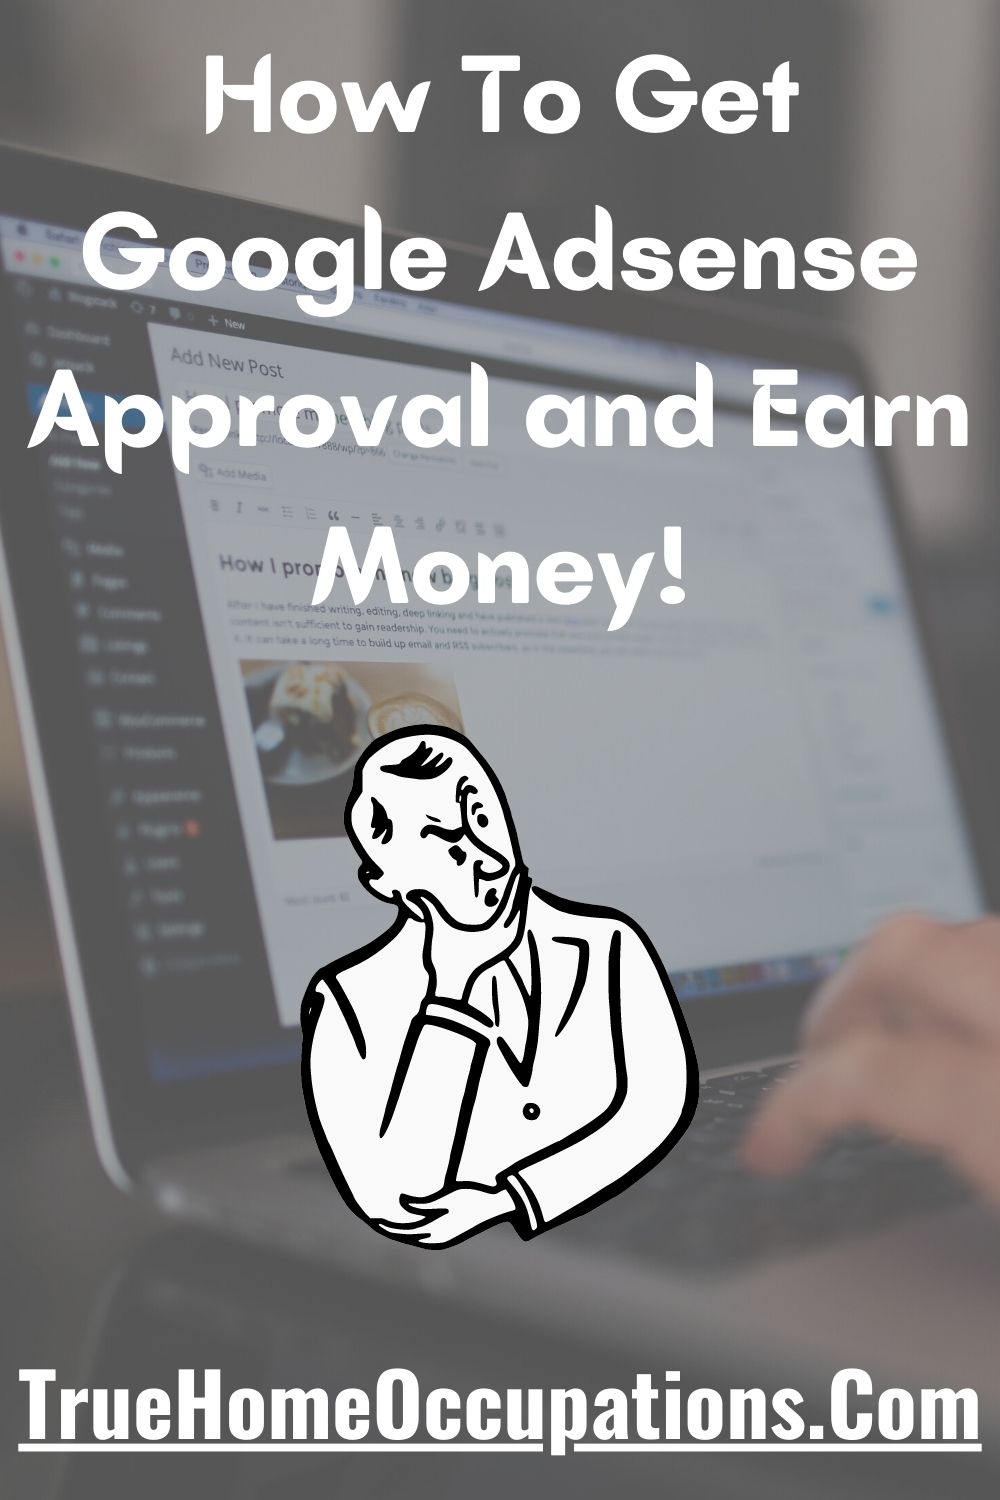 (11 Steps) How To Get Google Adsense Approval and Earn Money - TrueHomeOccupations.Com